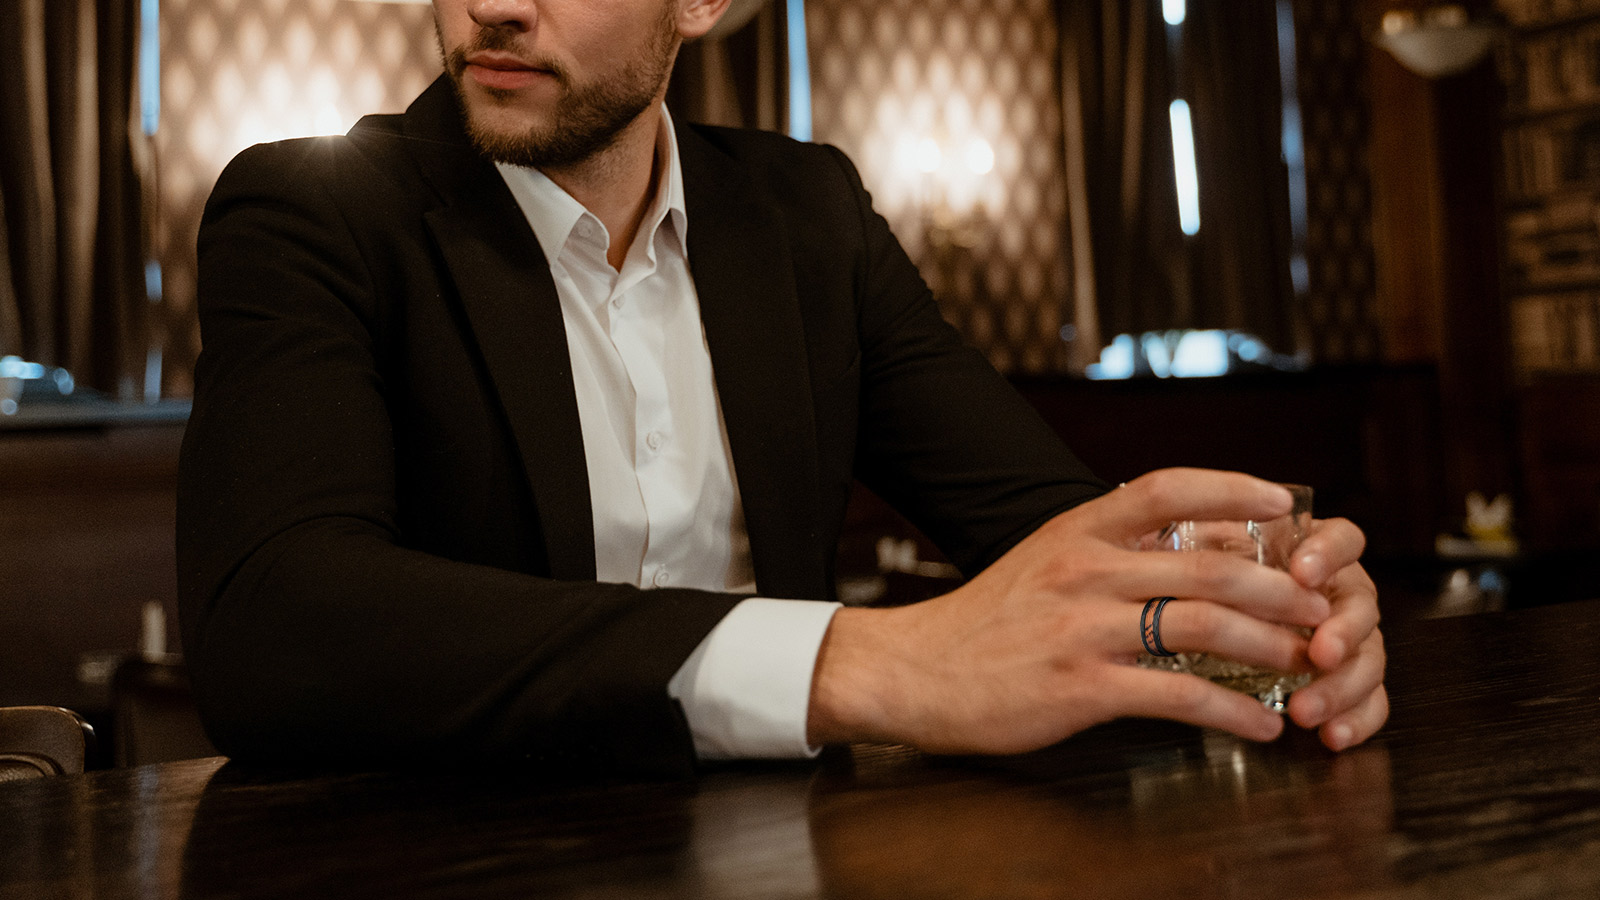 A man sitting at the bar with a glass of wine and a man's ring on his finger